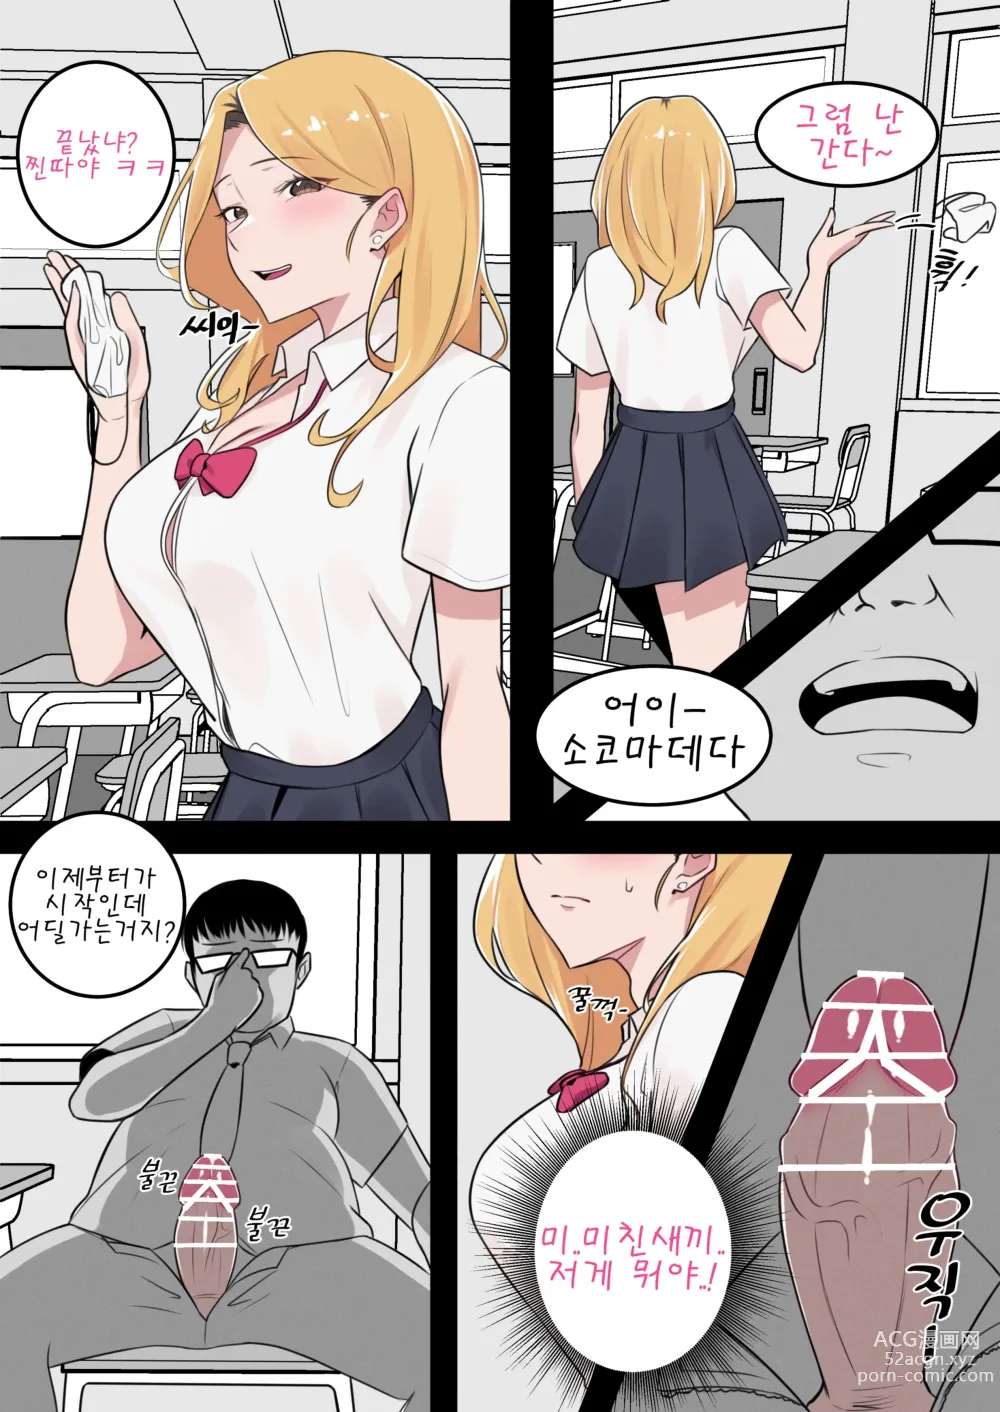 Page 7 of doujinshi After school with Il Jin-nyeo